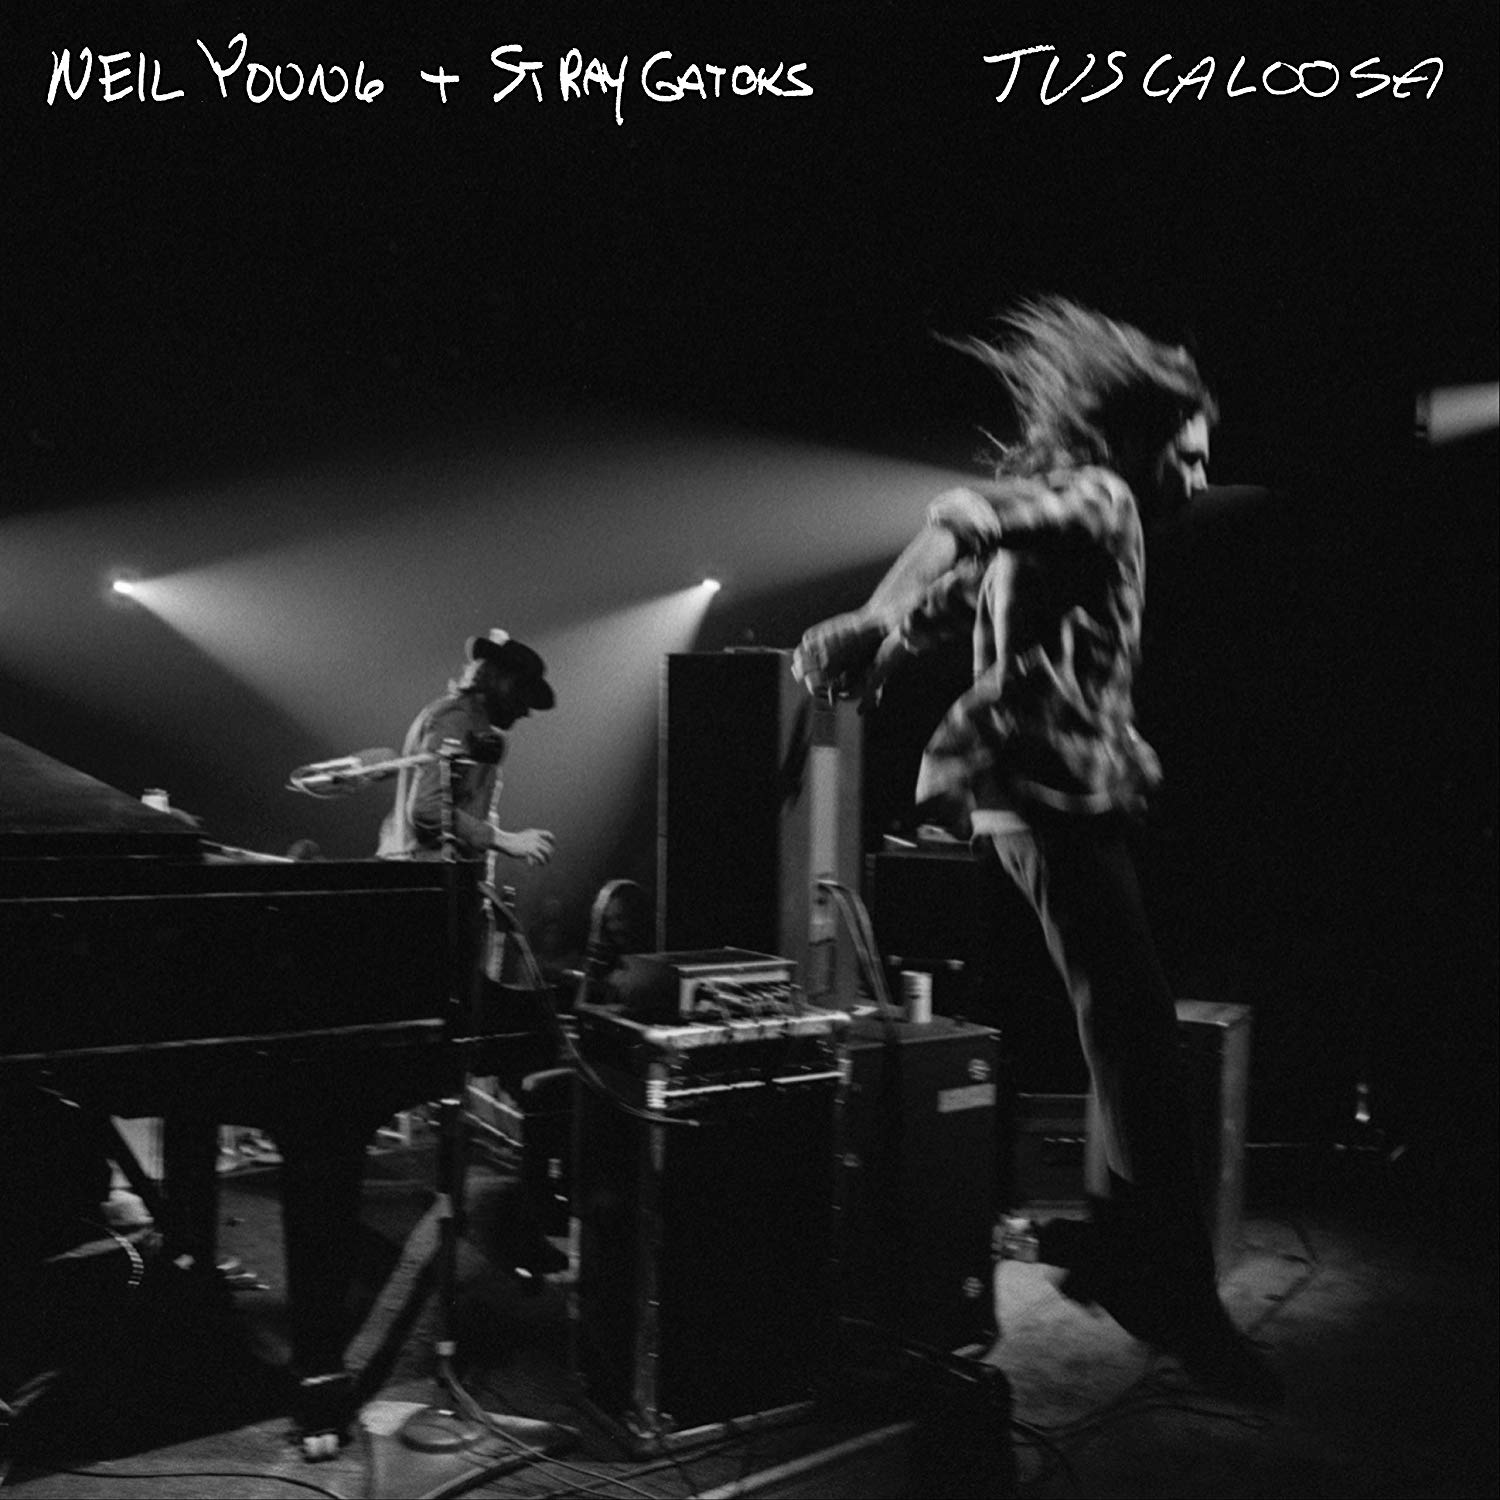 Neil Young with the Stray Gators: Tuscaloosa